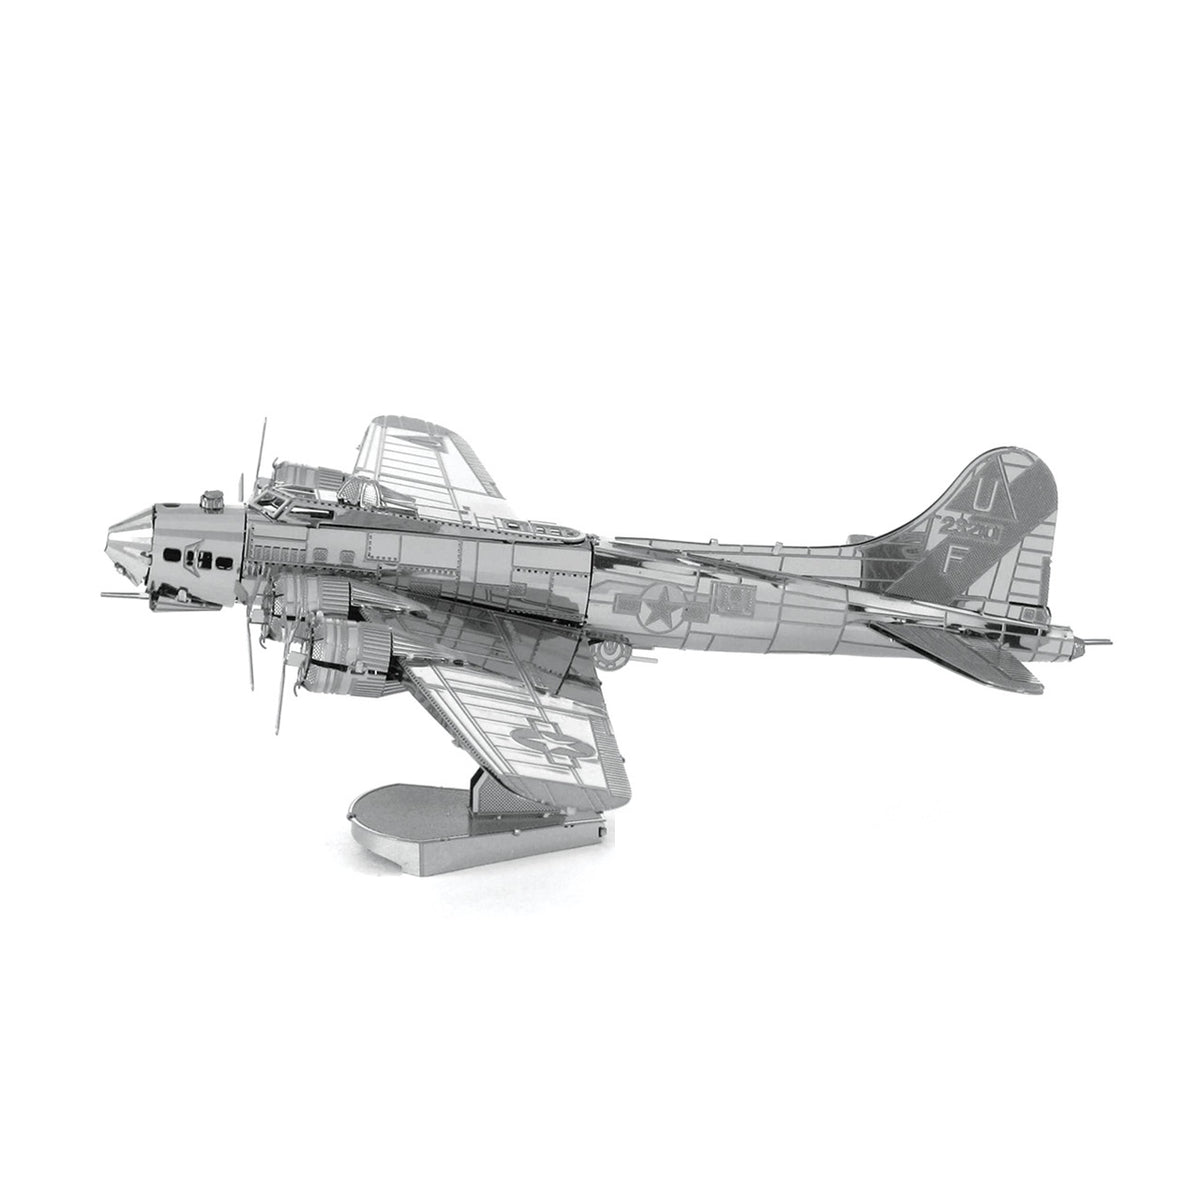 Fascinations MMS091 Metal Earth B-17 Flying Fortress 3D Model Kit, Silver